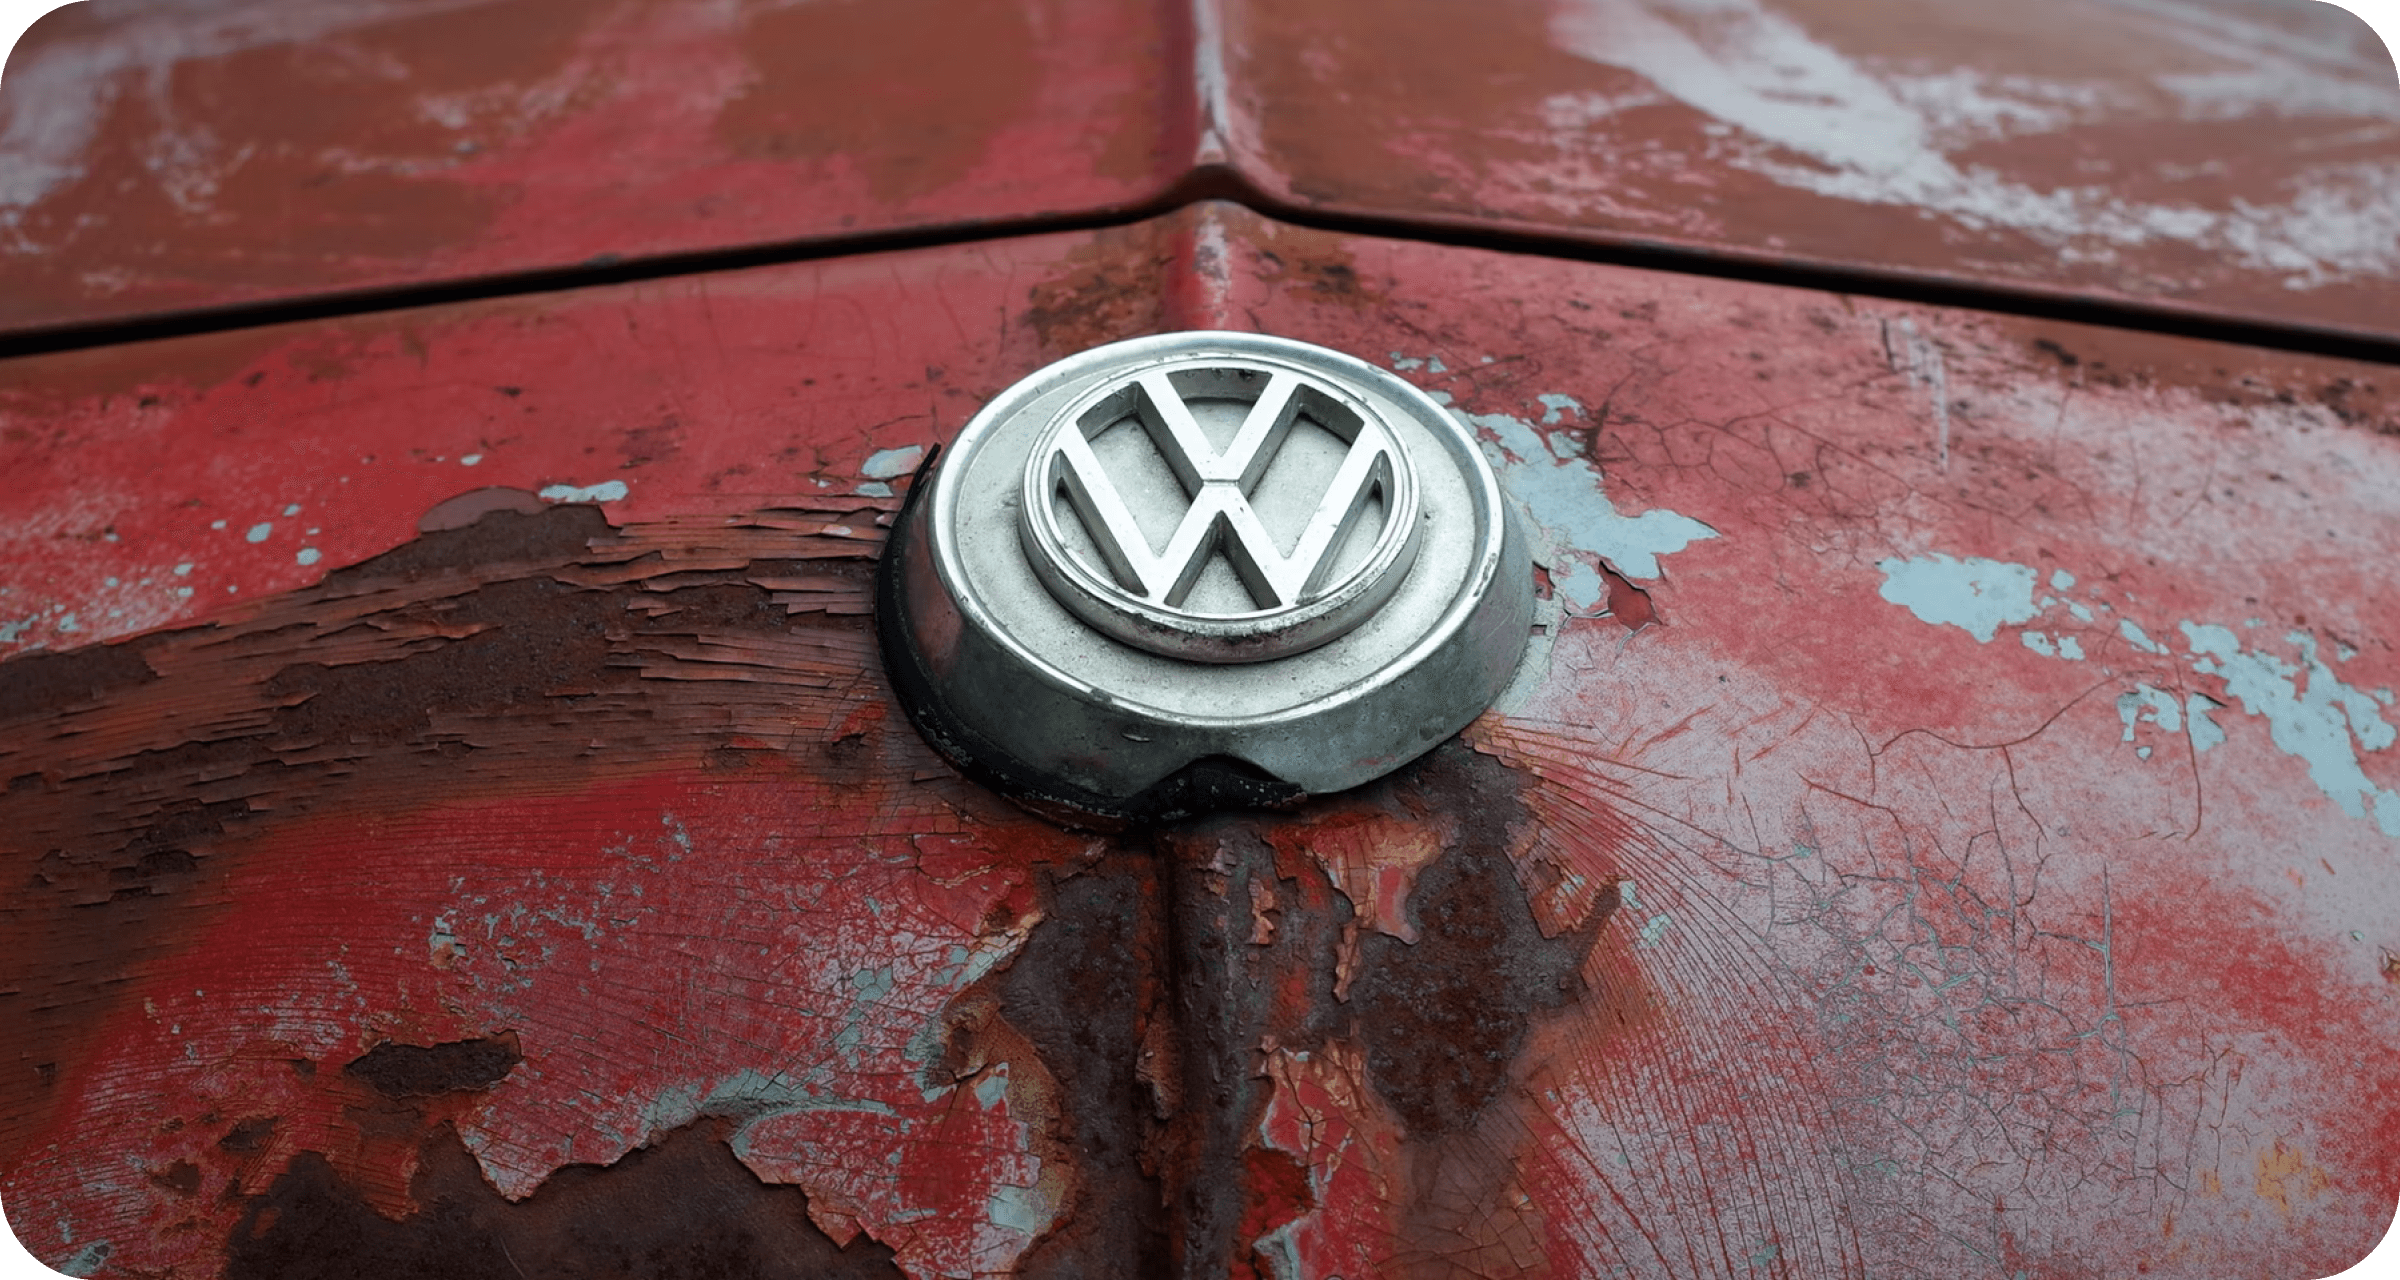 Volkswagen badge, shown on an old red car